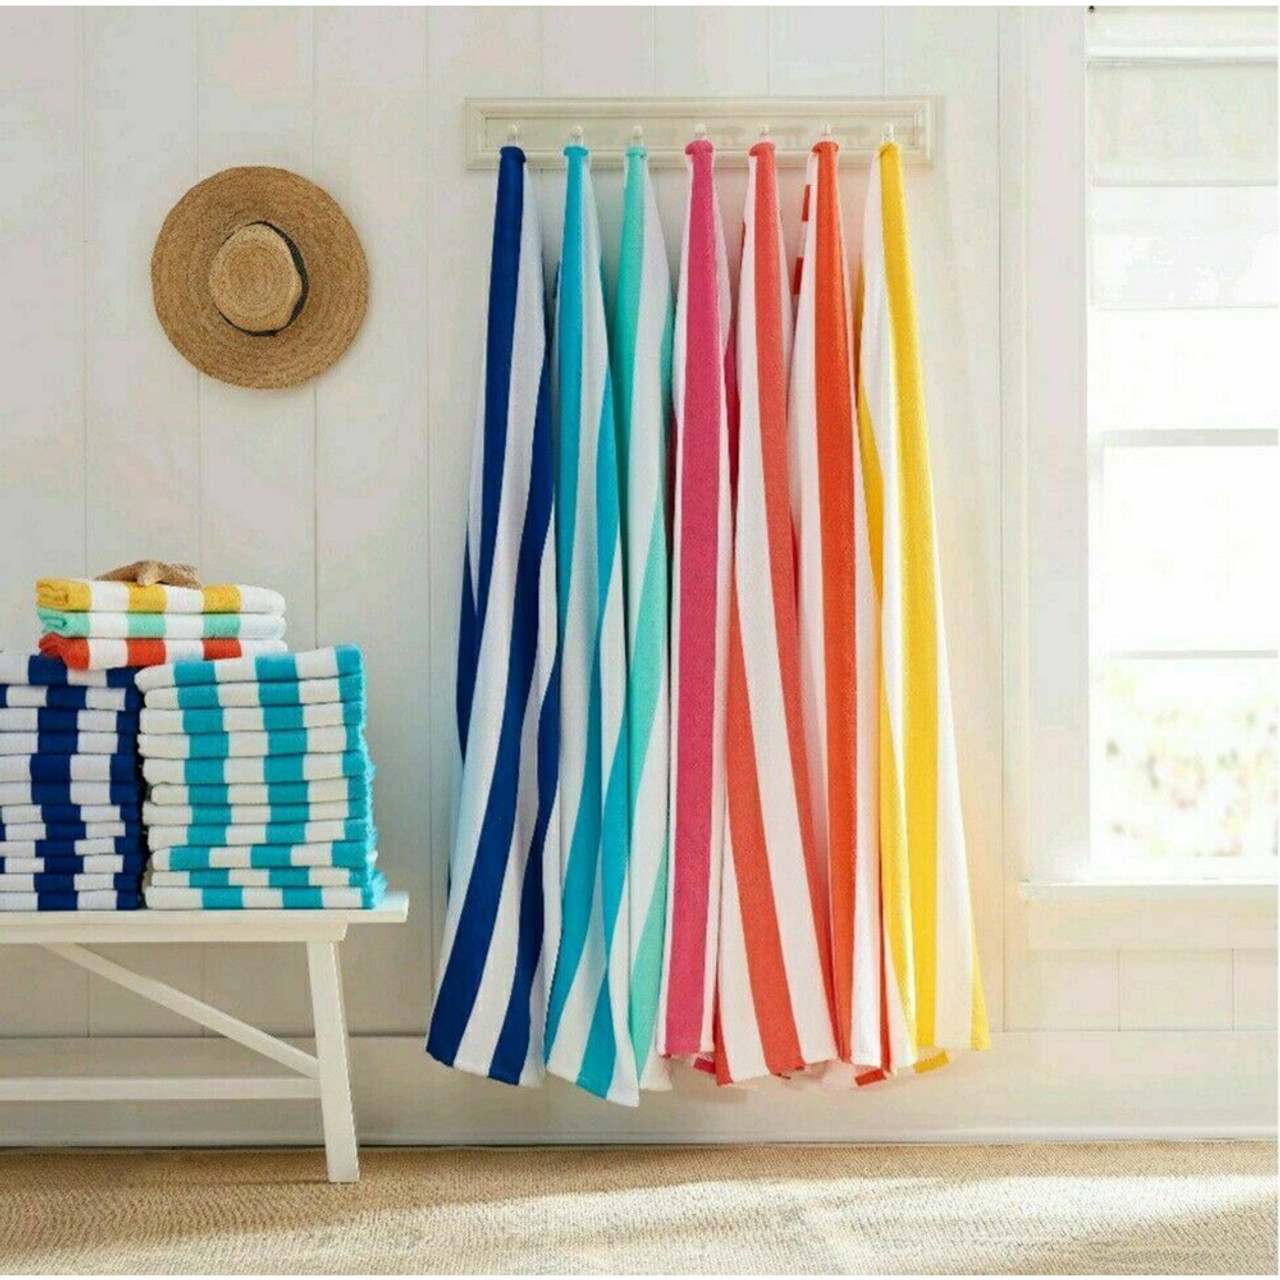 Ultra-Soft 100% Cotton Jumbo Striped Beach Towel (3-Pack) product image